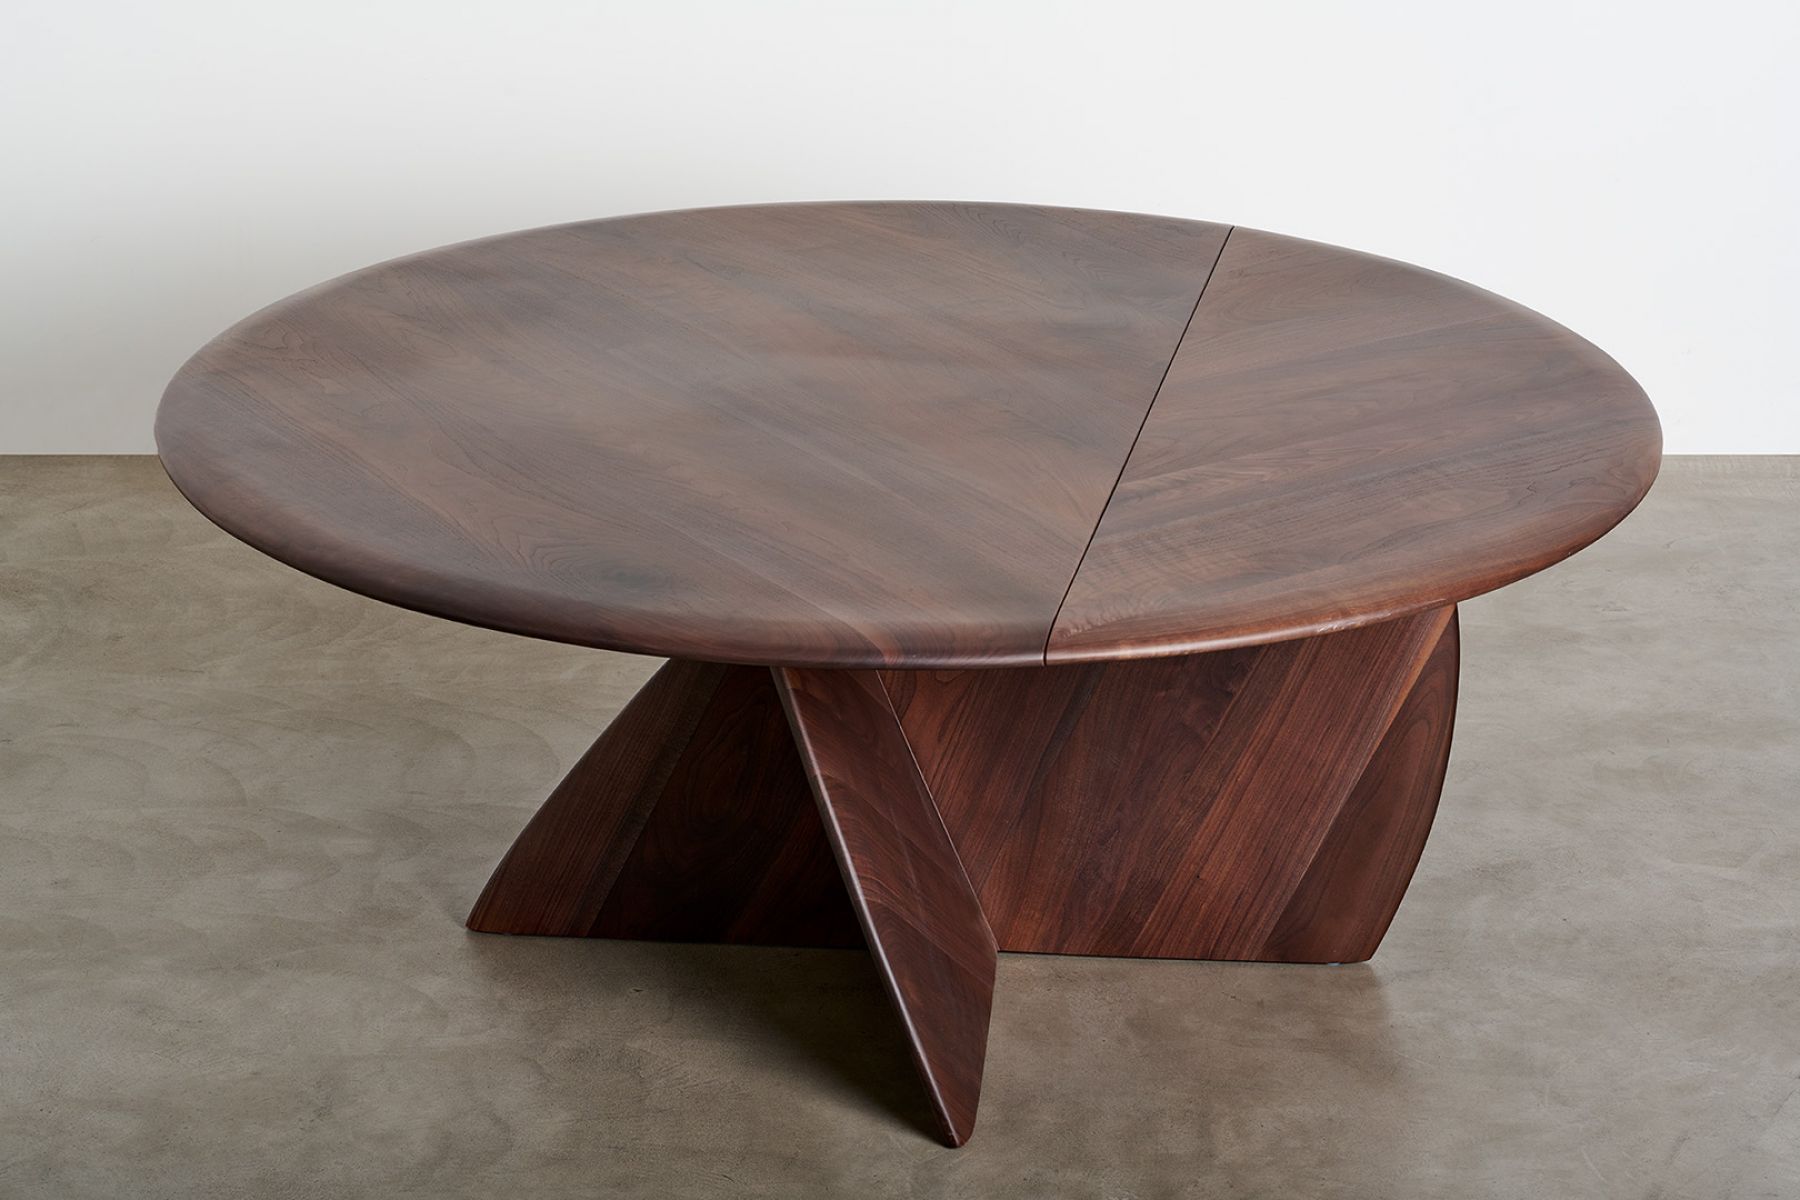 Dining table Collide Round Table Gal  Gaon Architect pic-3